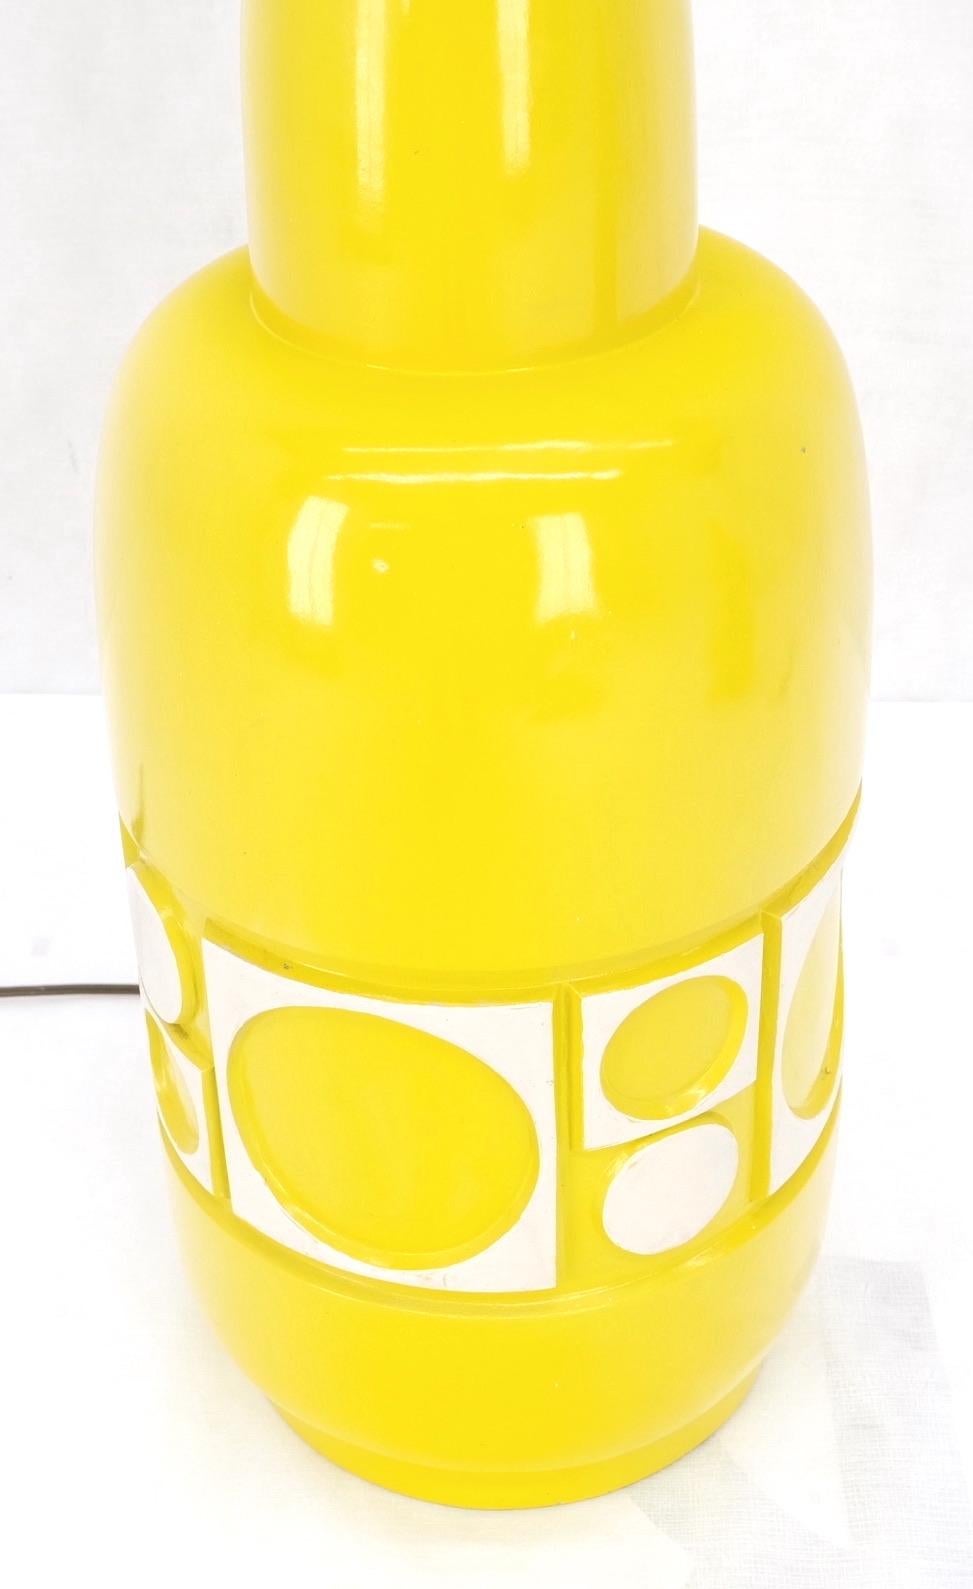 Pair of Lemon Yellow jug Bottle ShapeArt  Porcelain Pottery Ceramic Table Lamps In Good Condition For Sale In Rockaway, NJ